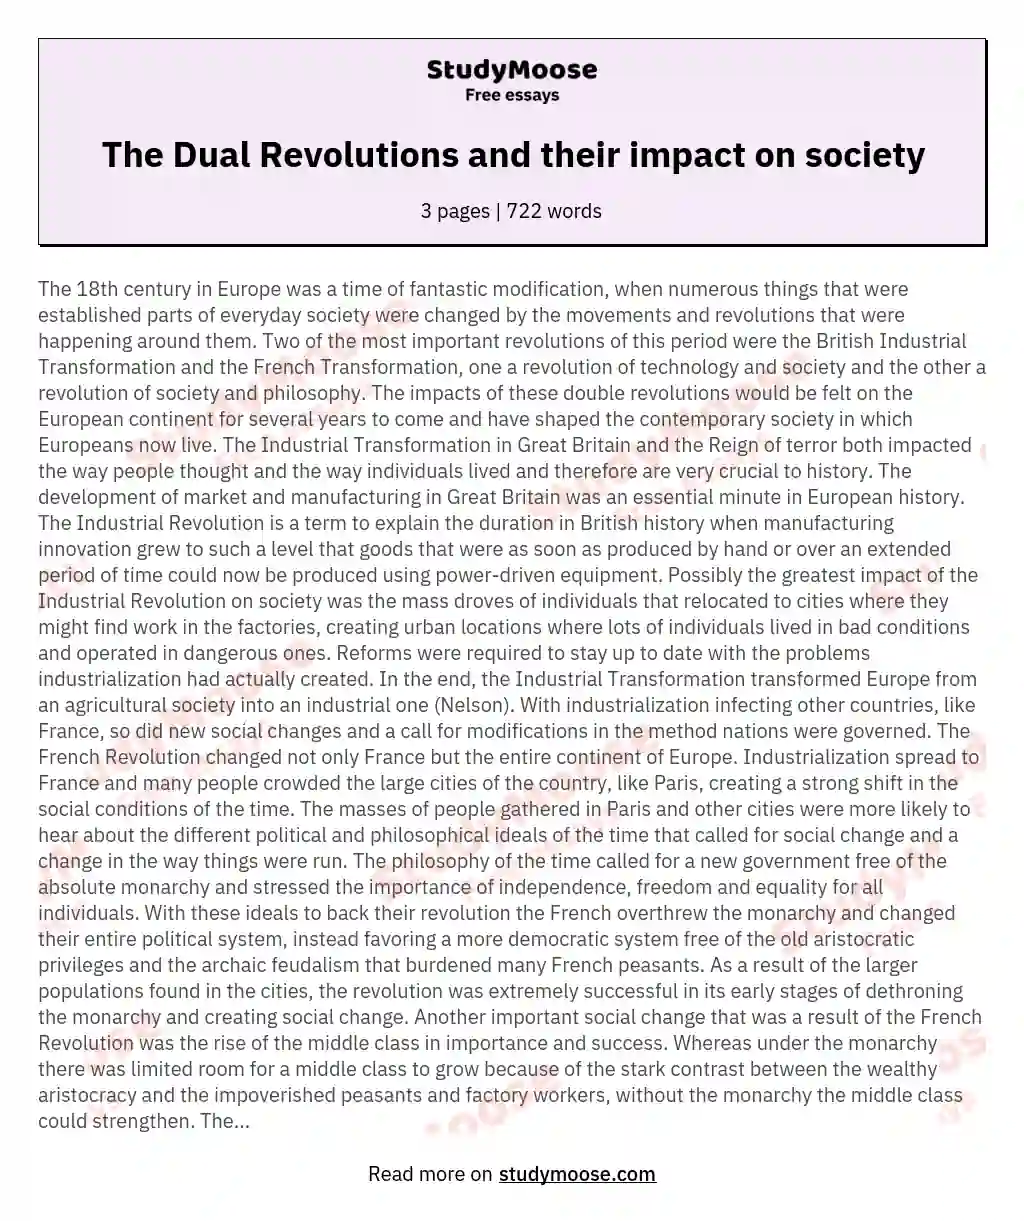 The Dual Revolutions and their impact on society essay